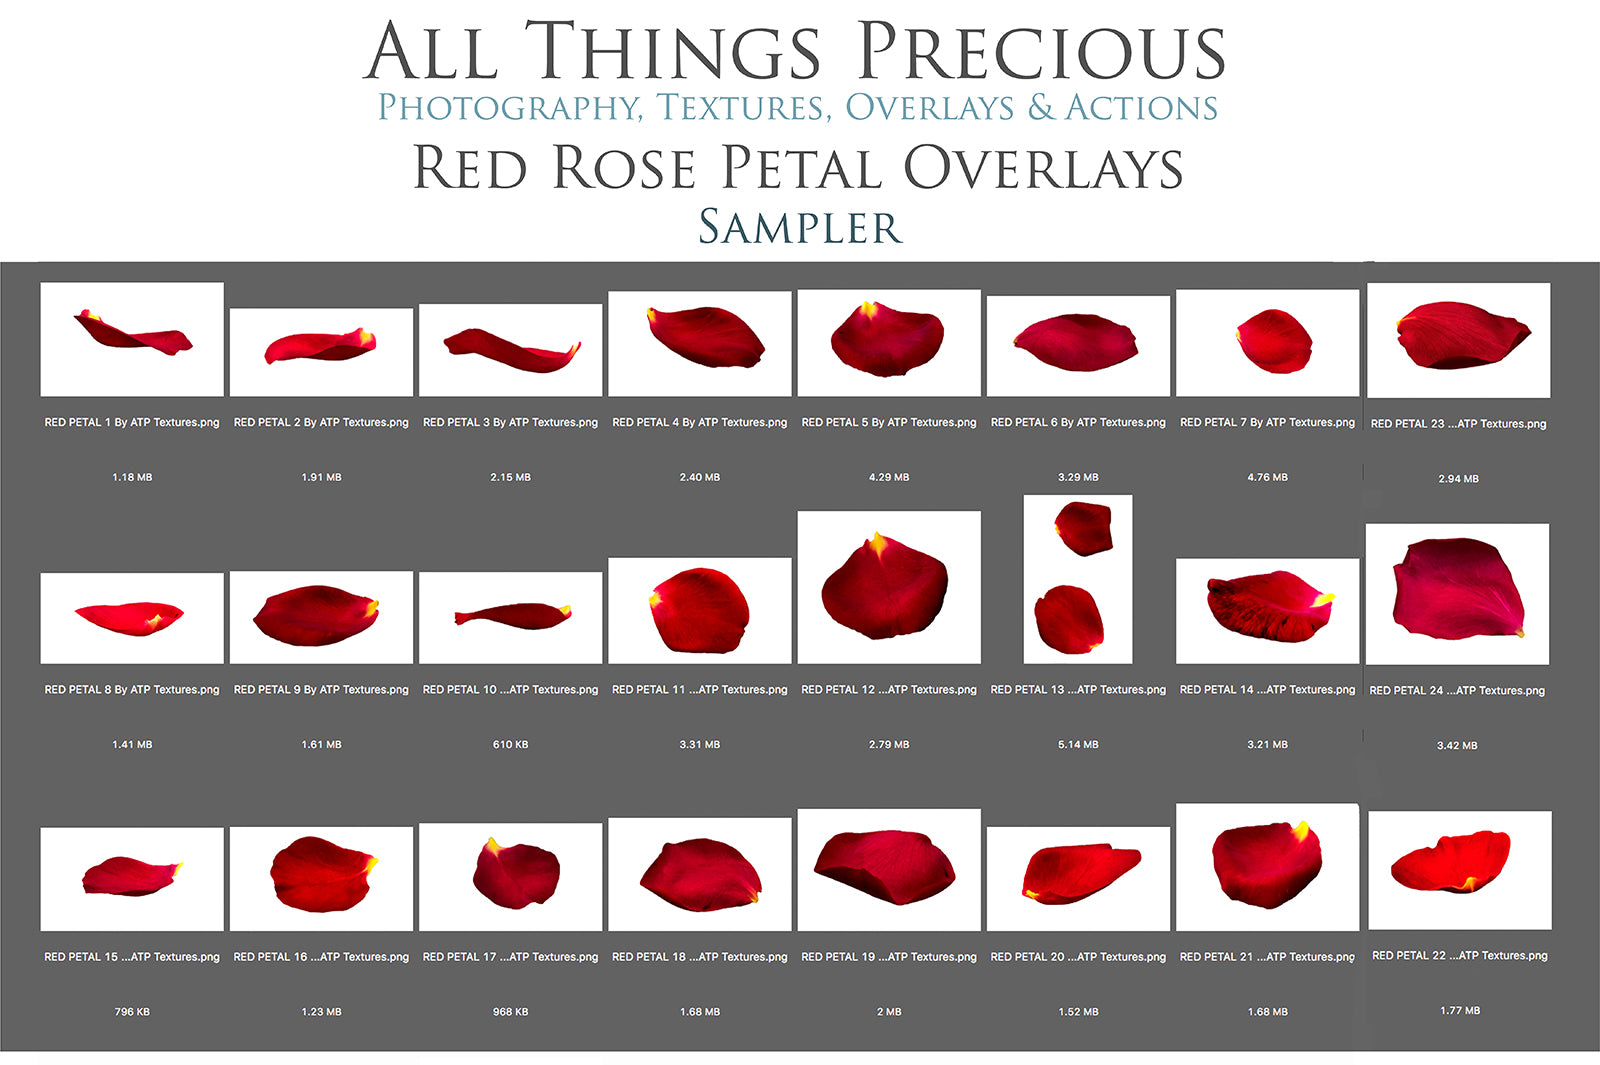 Sweet floaty Red Rose Petals! Png clipart confetti, Overlays for photographers, Photoshop Overlay, digital edits, photoshop. Photography Editing graphic assets. Red, gold, falling valentine love. Wedding, Couples Photo. High resolution, ATP textures. 